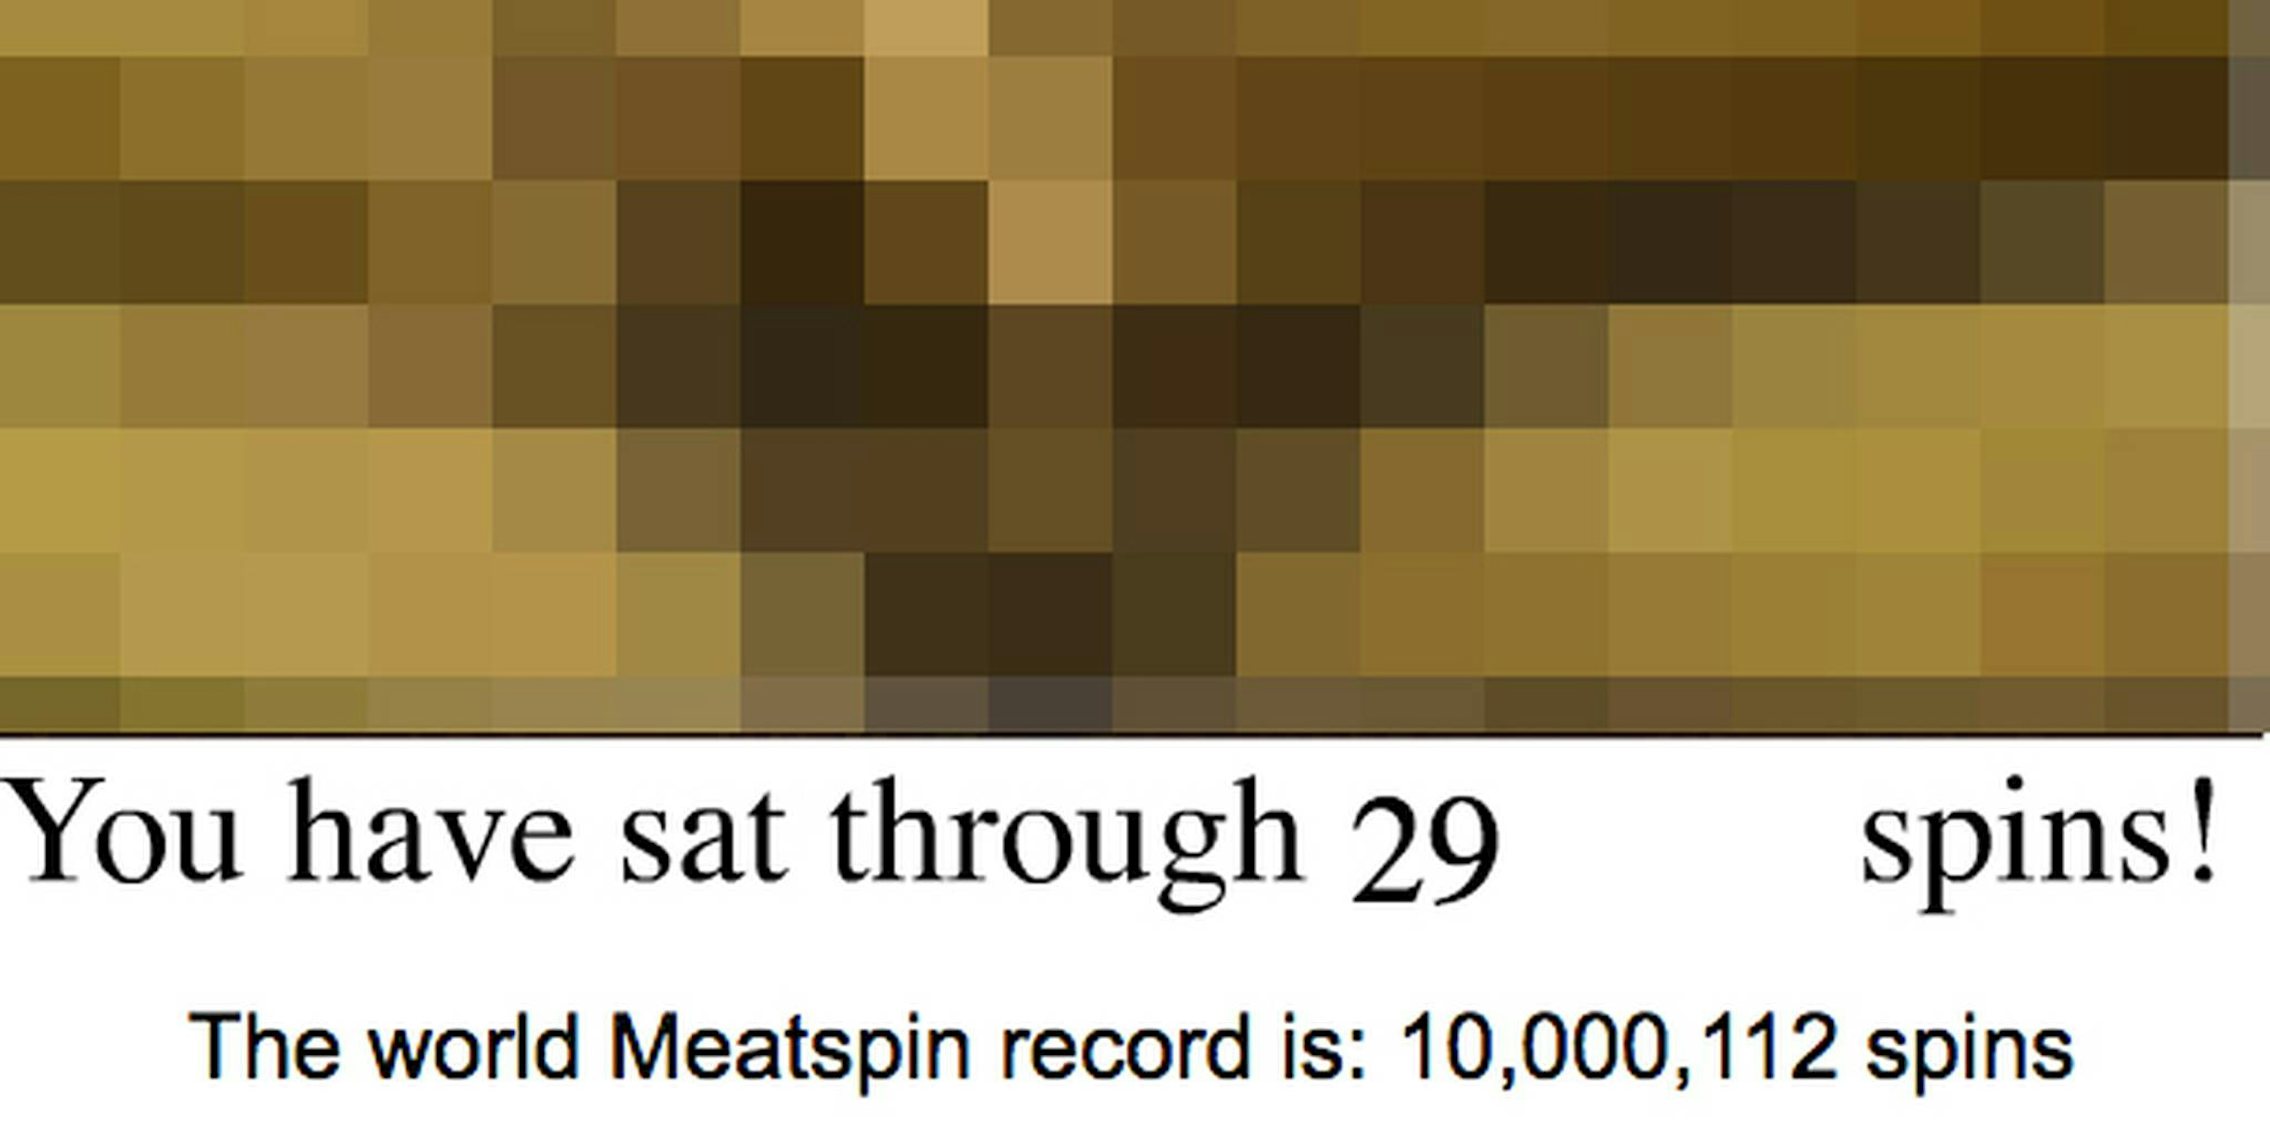 An image of Meatspin that shows how many spins you have sat through.